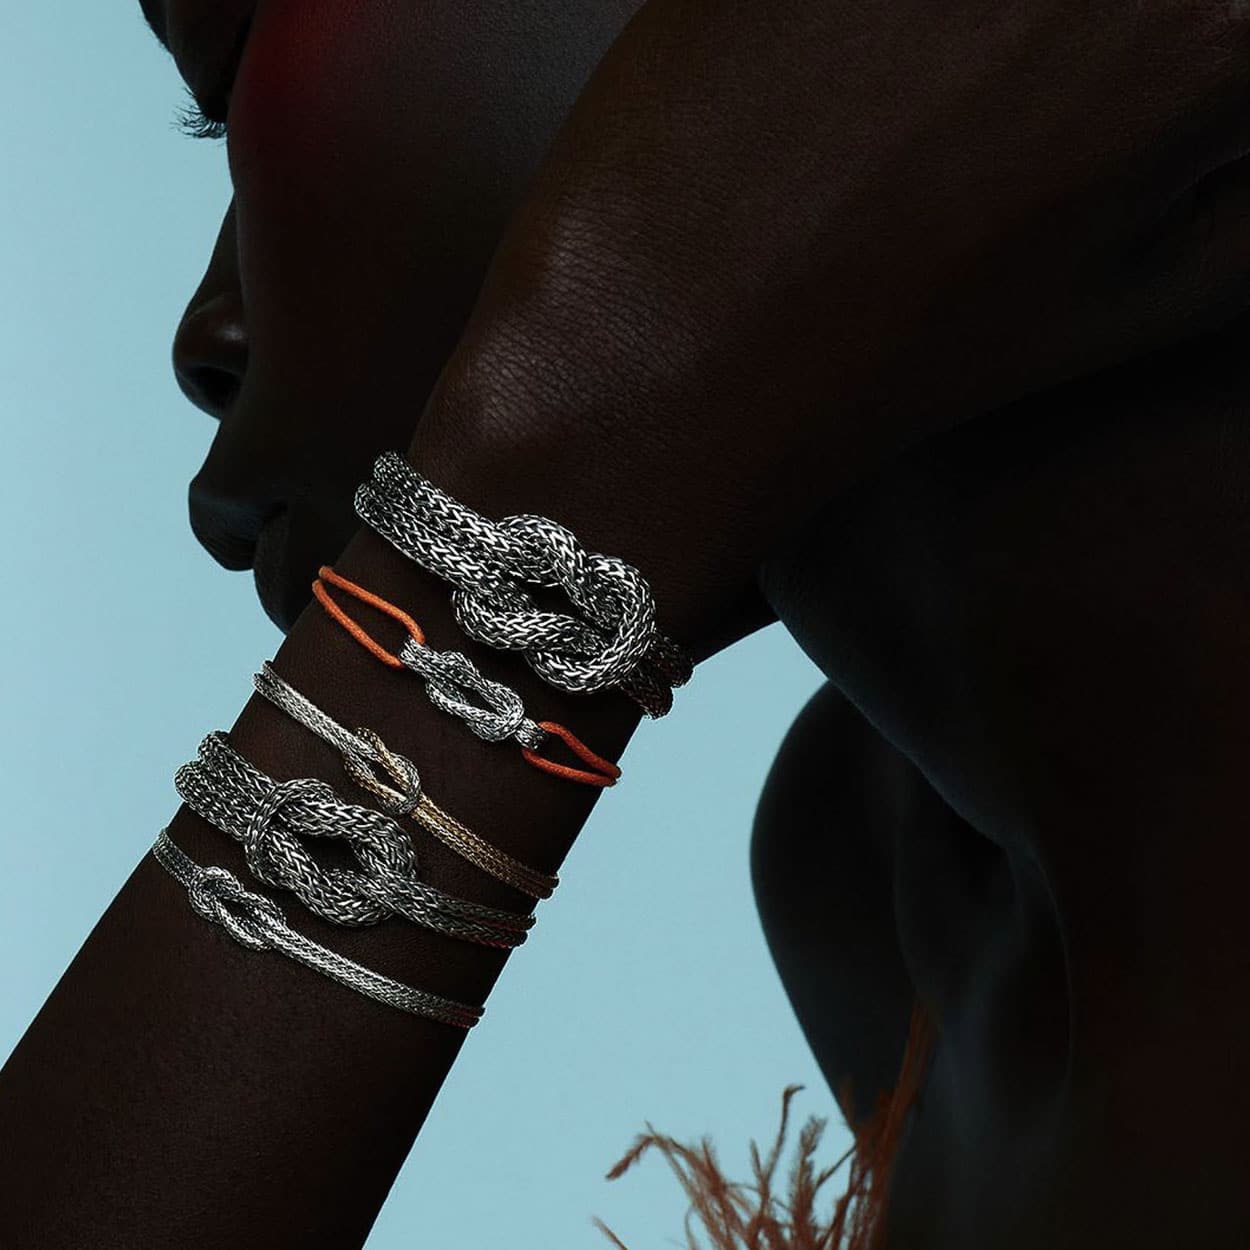 Close-up of an individual showcasing multiple intricately designed silver bracelets with a knot motif on their forearm against a light blue background. Some bracelets have orange accents, and the person's face is partially visible, turned to the side.